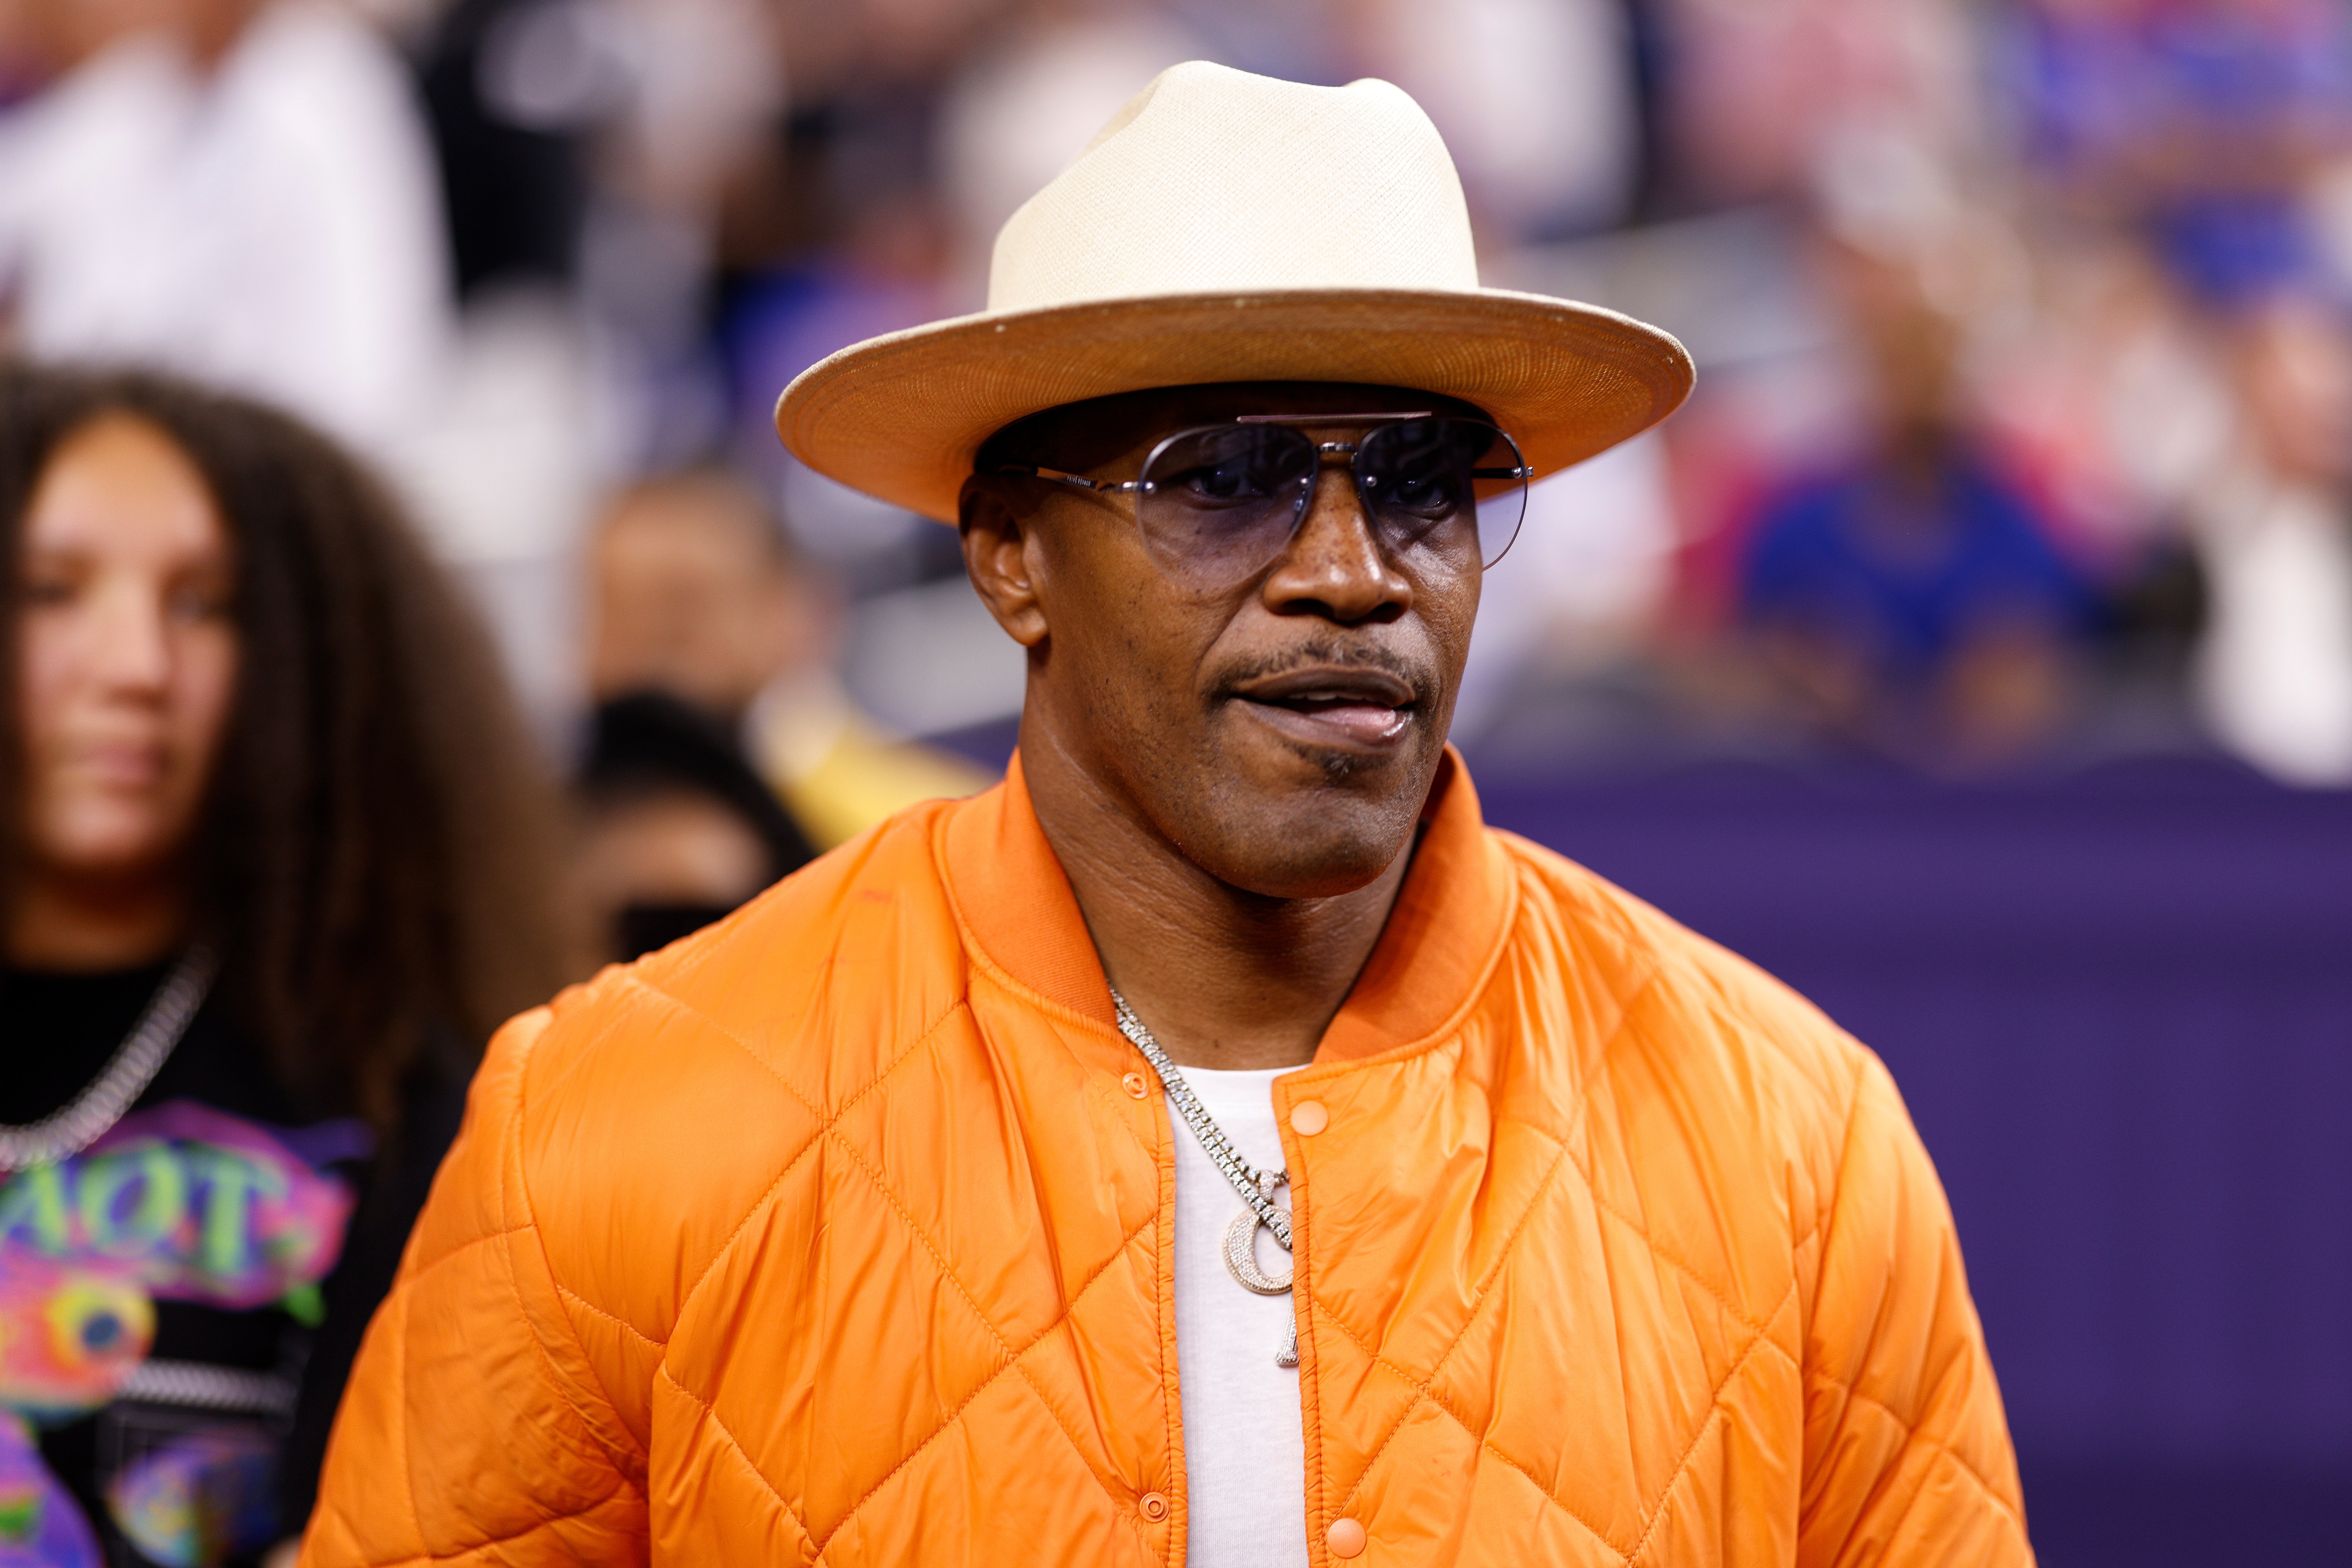 Actor Jamie Foxx attends the game between the North Carolina Tar Heels and the Duke Blue Devils at Caesars Superdome on April 2, 2022 in New Orleans, Louisiana. | Source: Getty Images